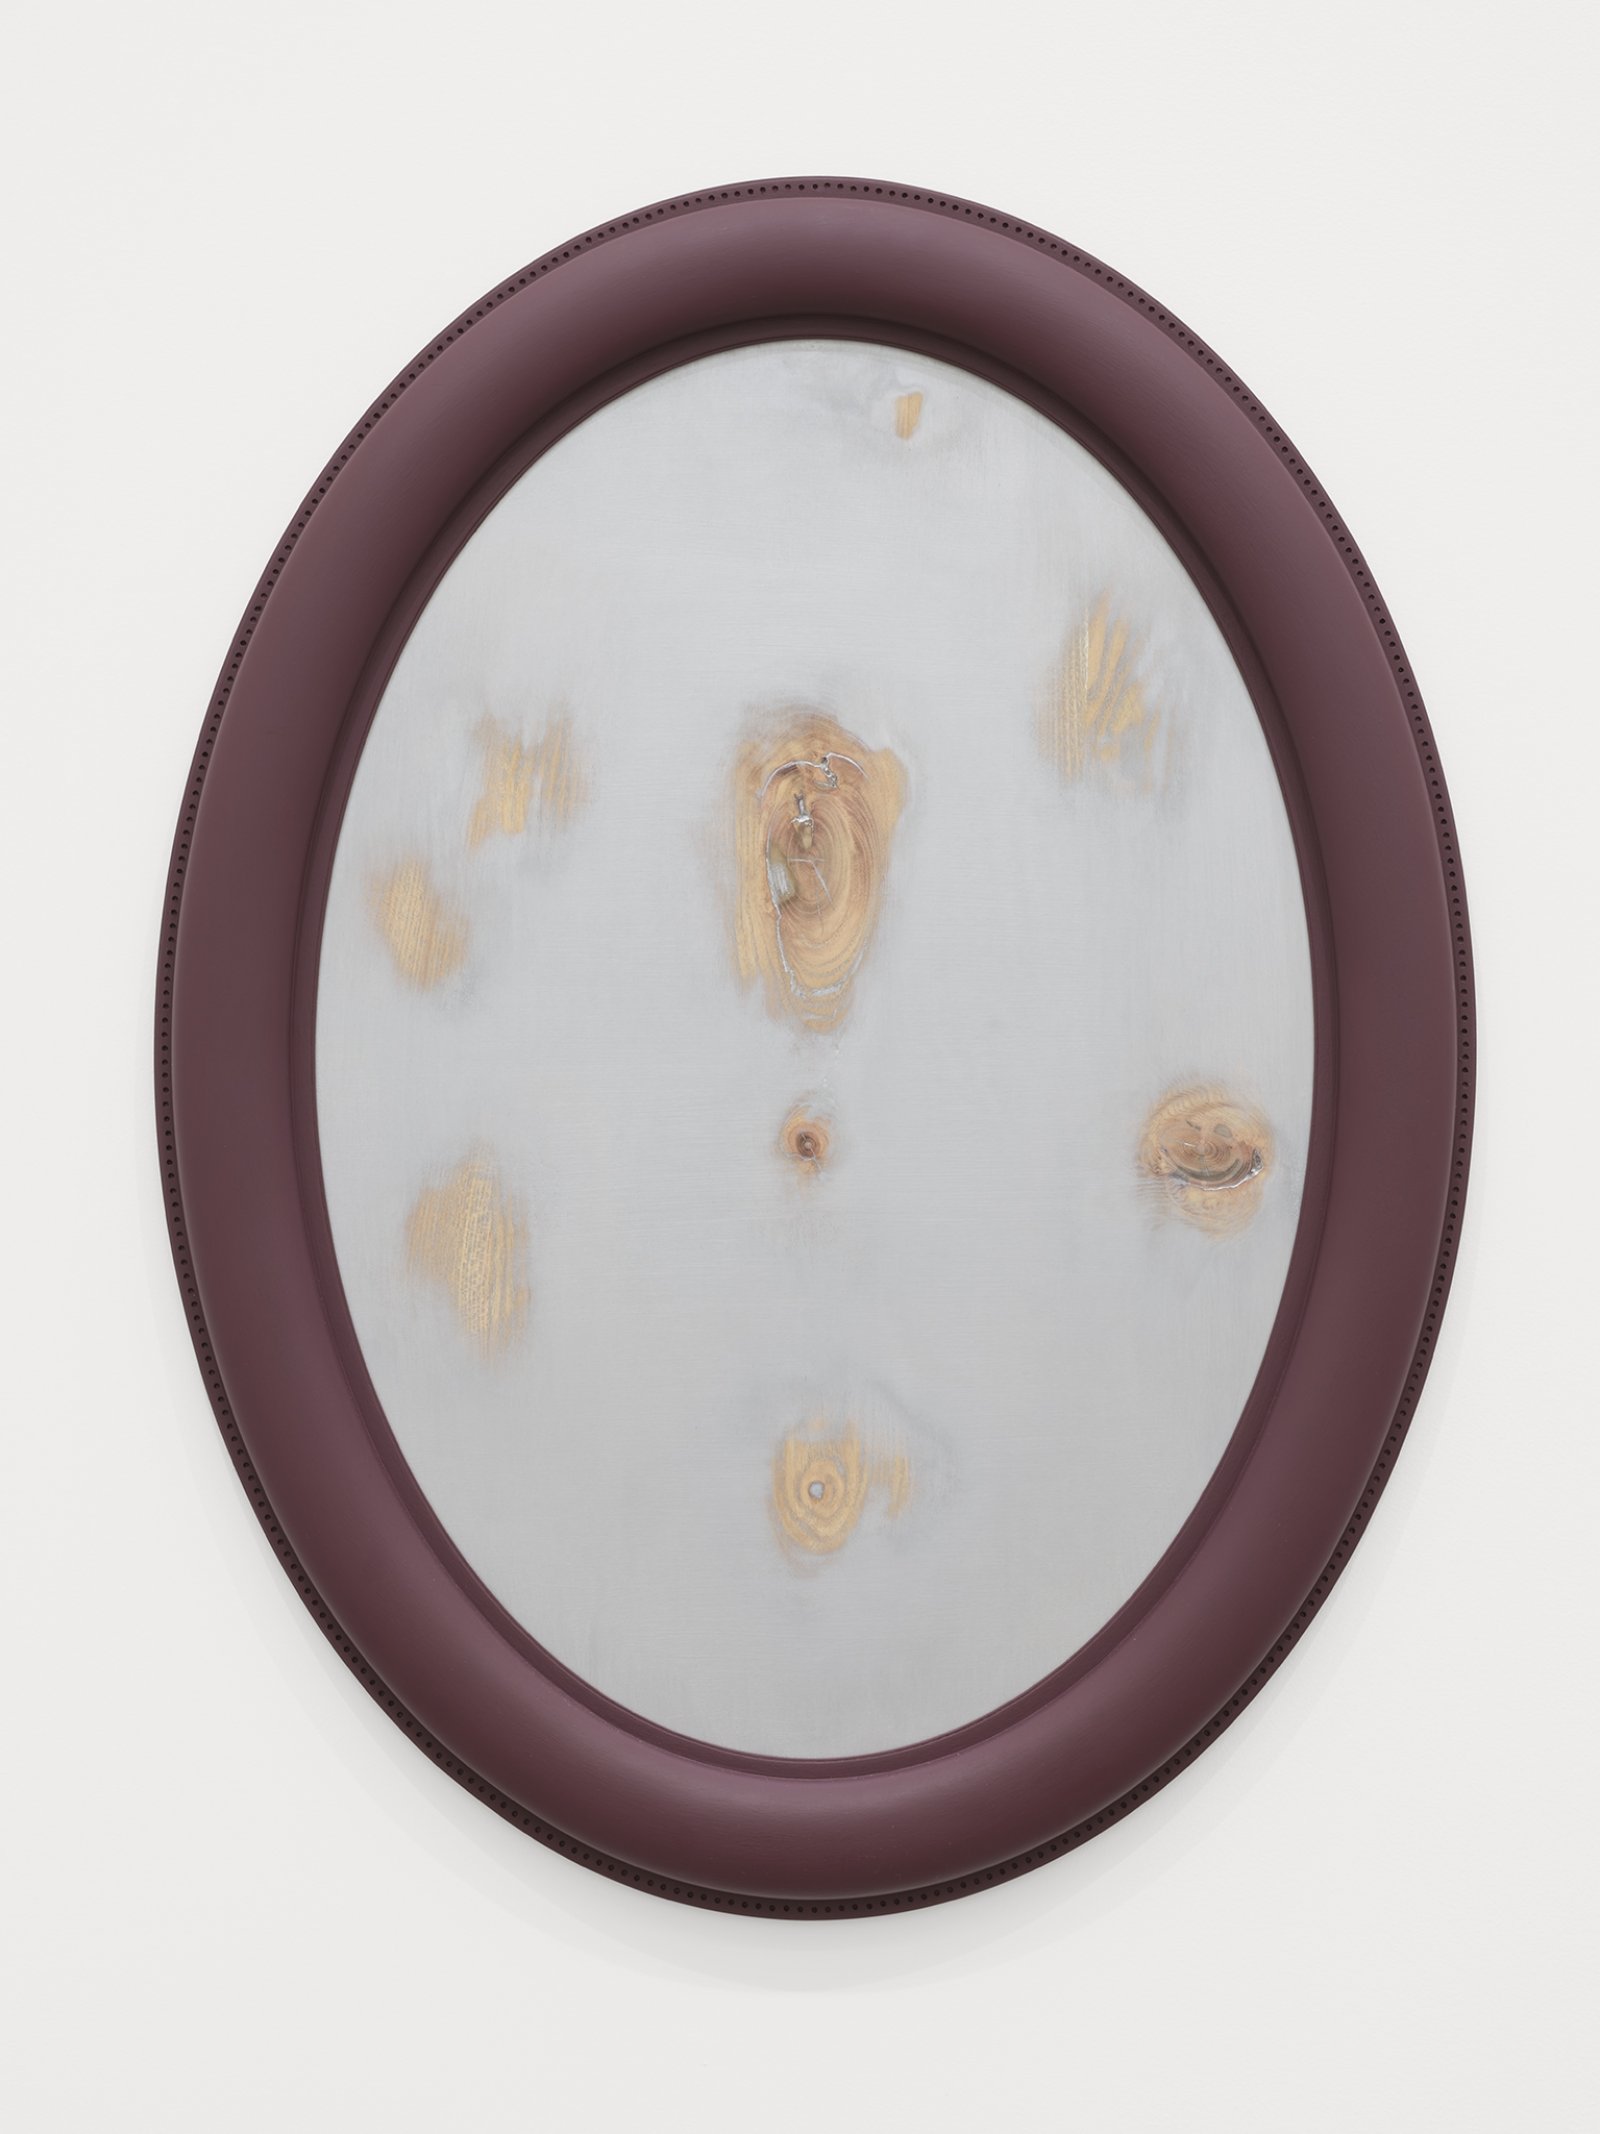 ​Ashes Withyman, Traceless, no more need to hide (now the old mirror reflects everything), 2020, basswood wood, honey locust wood, paint, 30 x 23 in. (76 x 57 cm) by Ashes Withyman